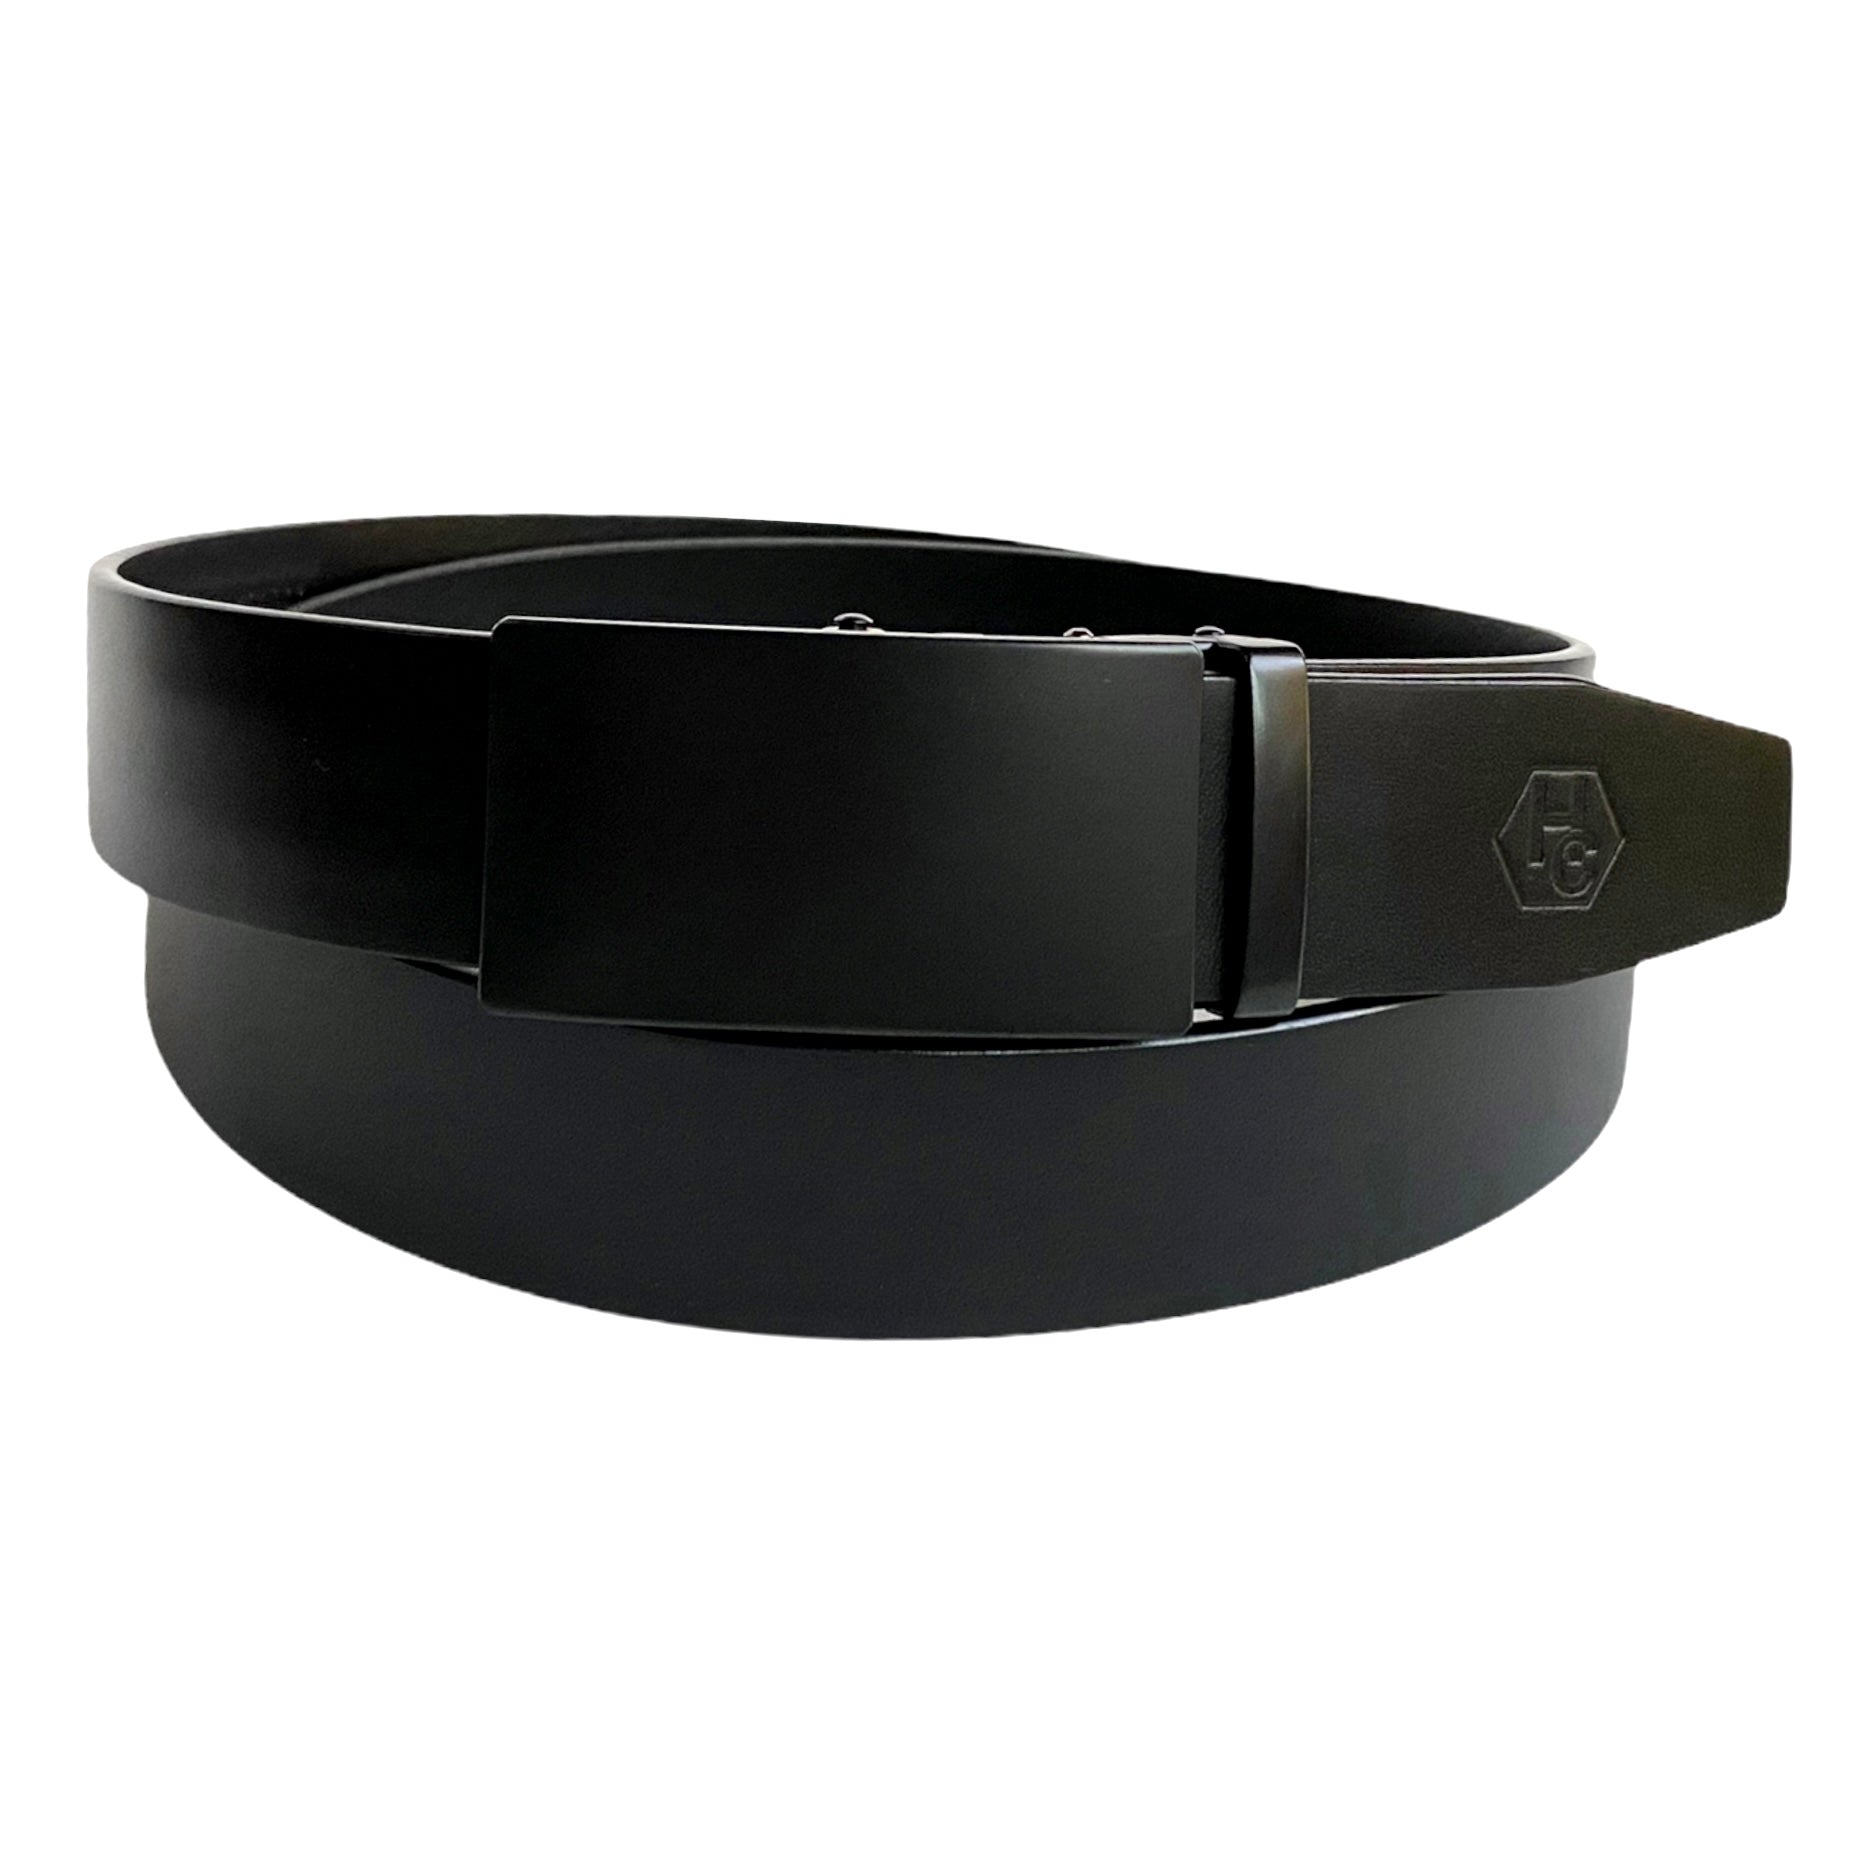 1.38" Genuine Leather Black Smooth Strap And 1.38" Automatic Belt Buckle Black 24710766493847